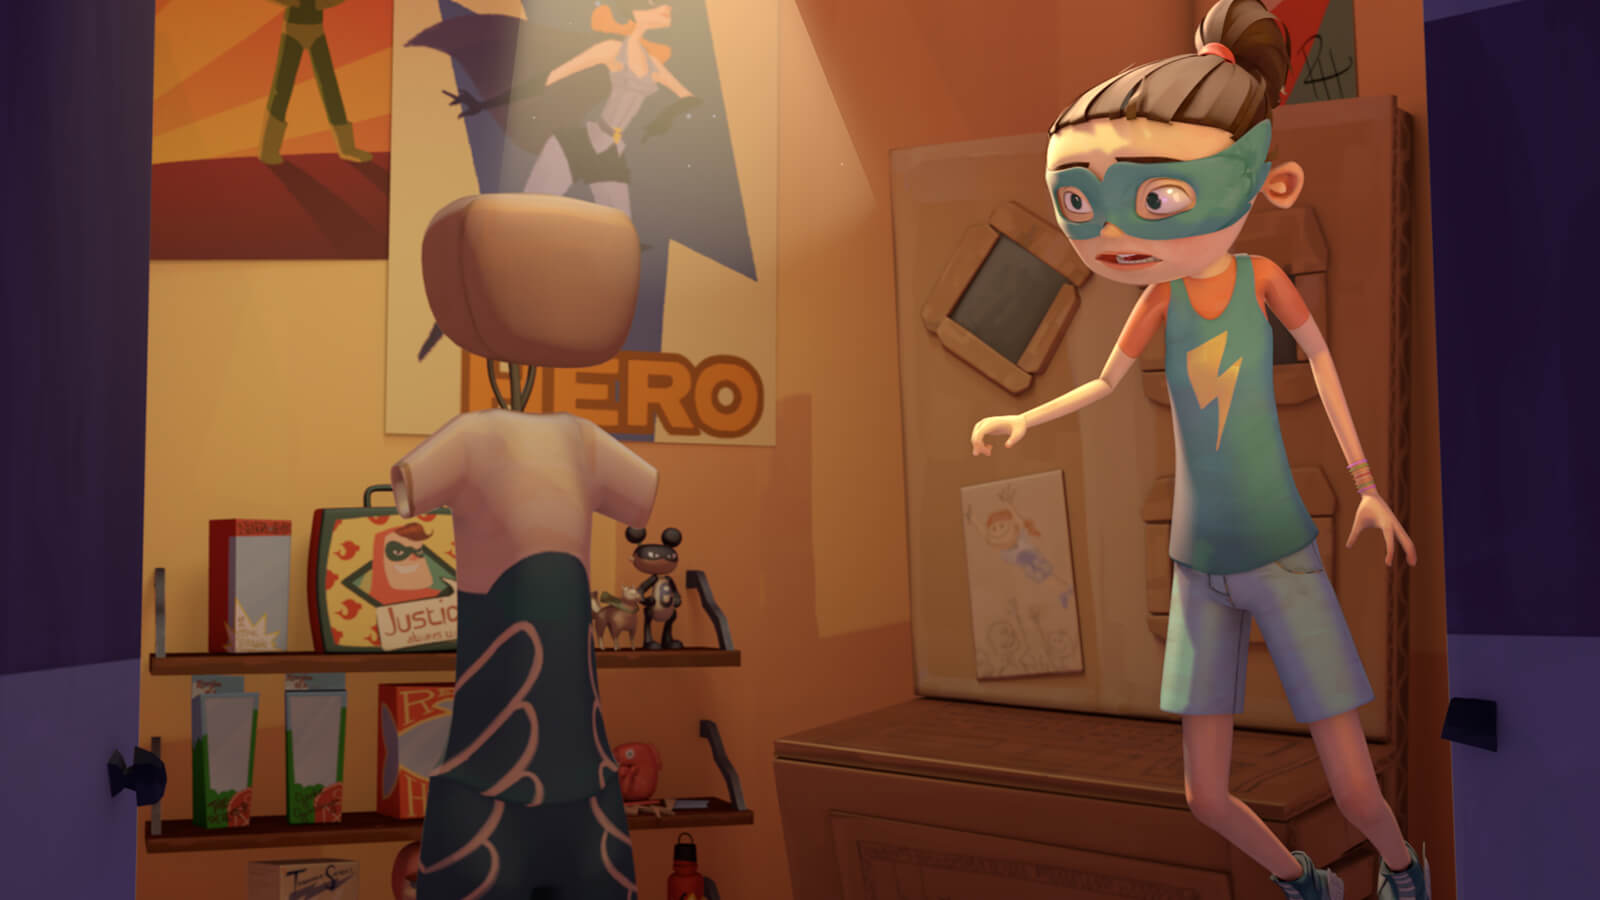 A young girl in a room decorated with superhero merchandise wears a teal mask and lightning-bolt tank top